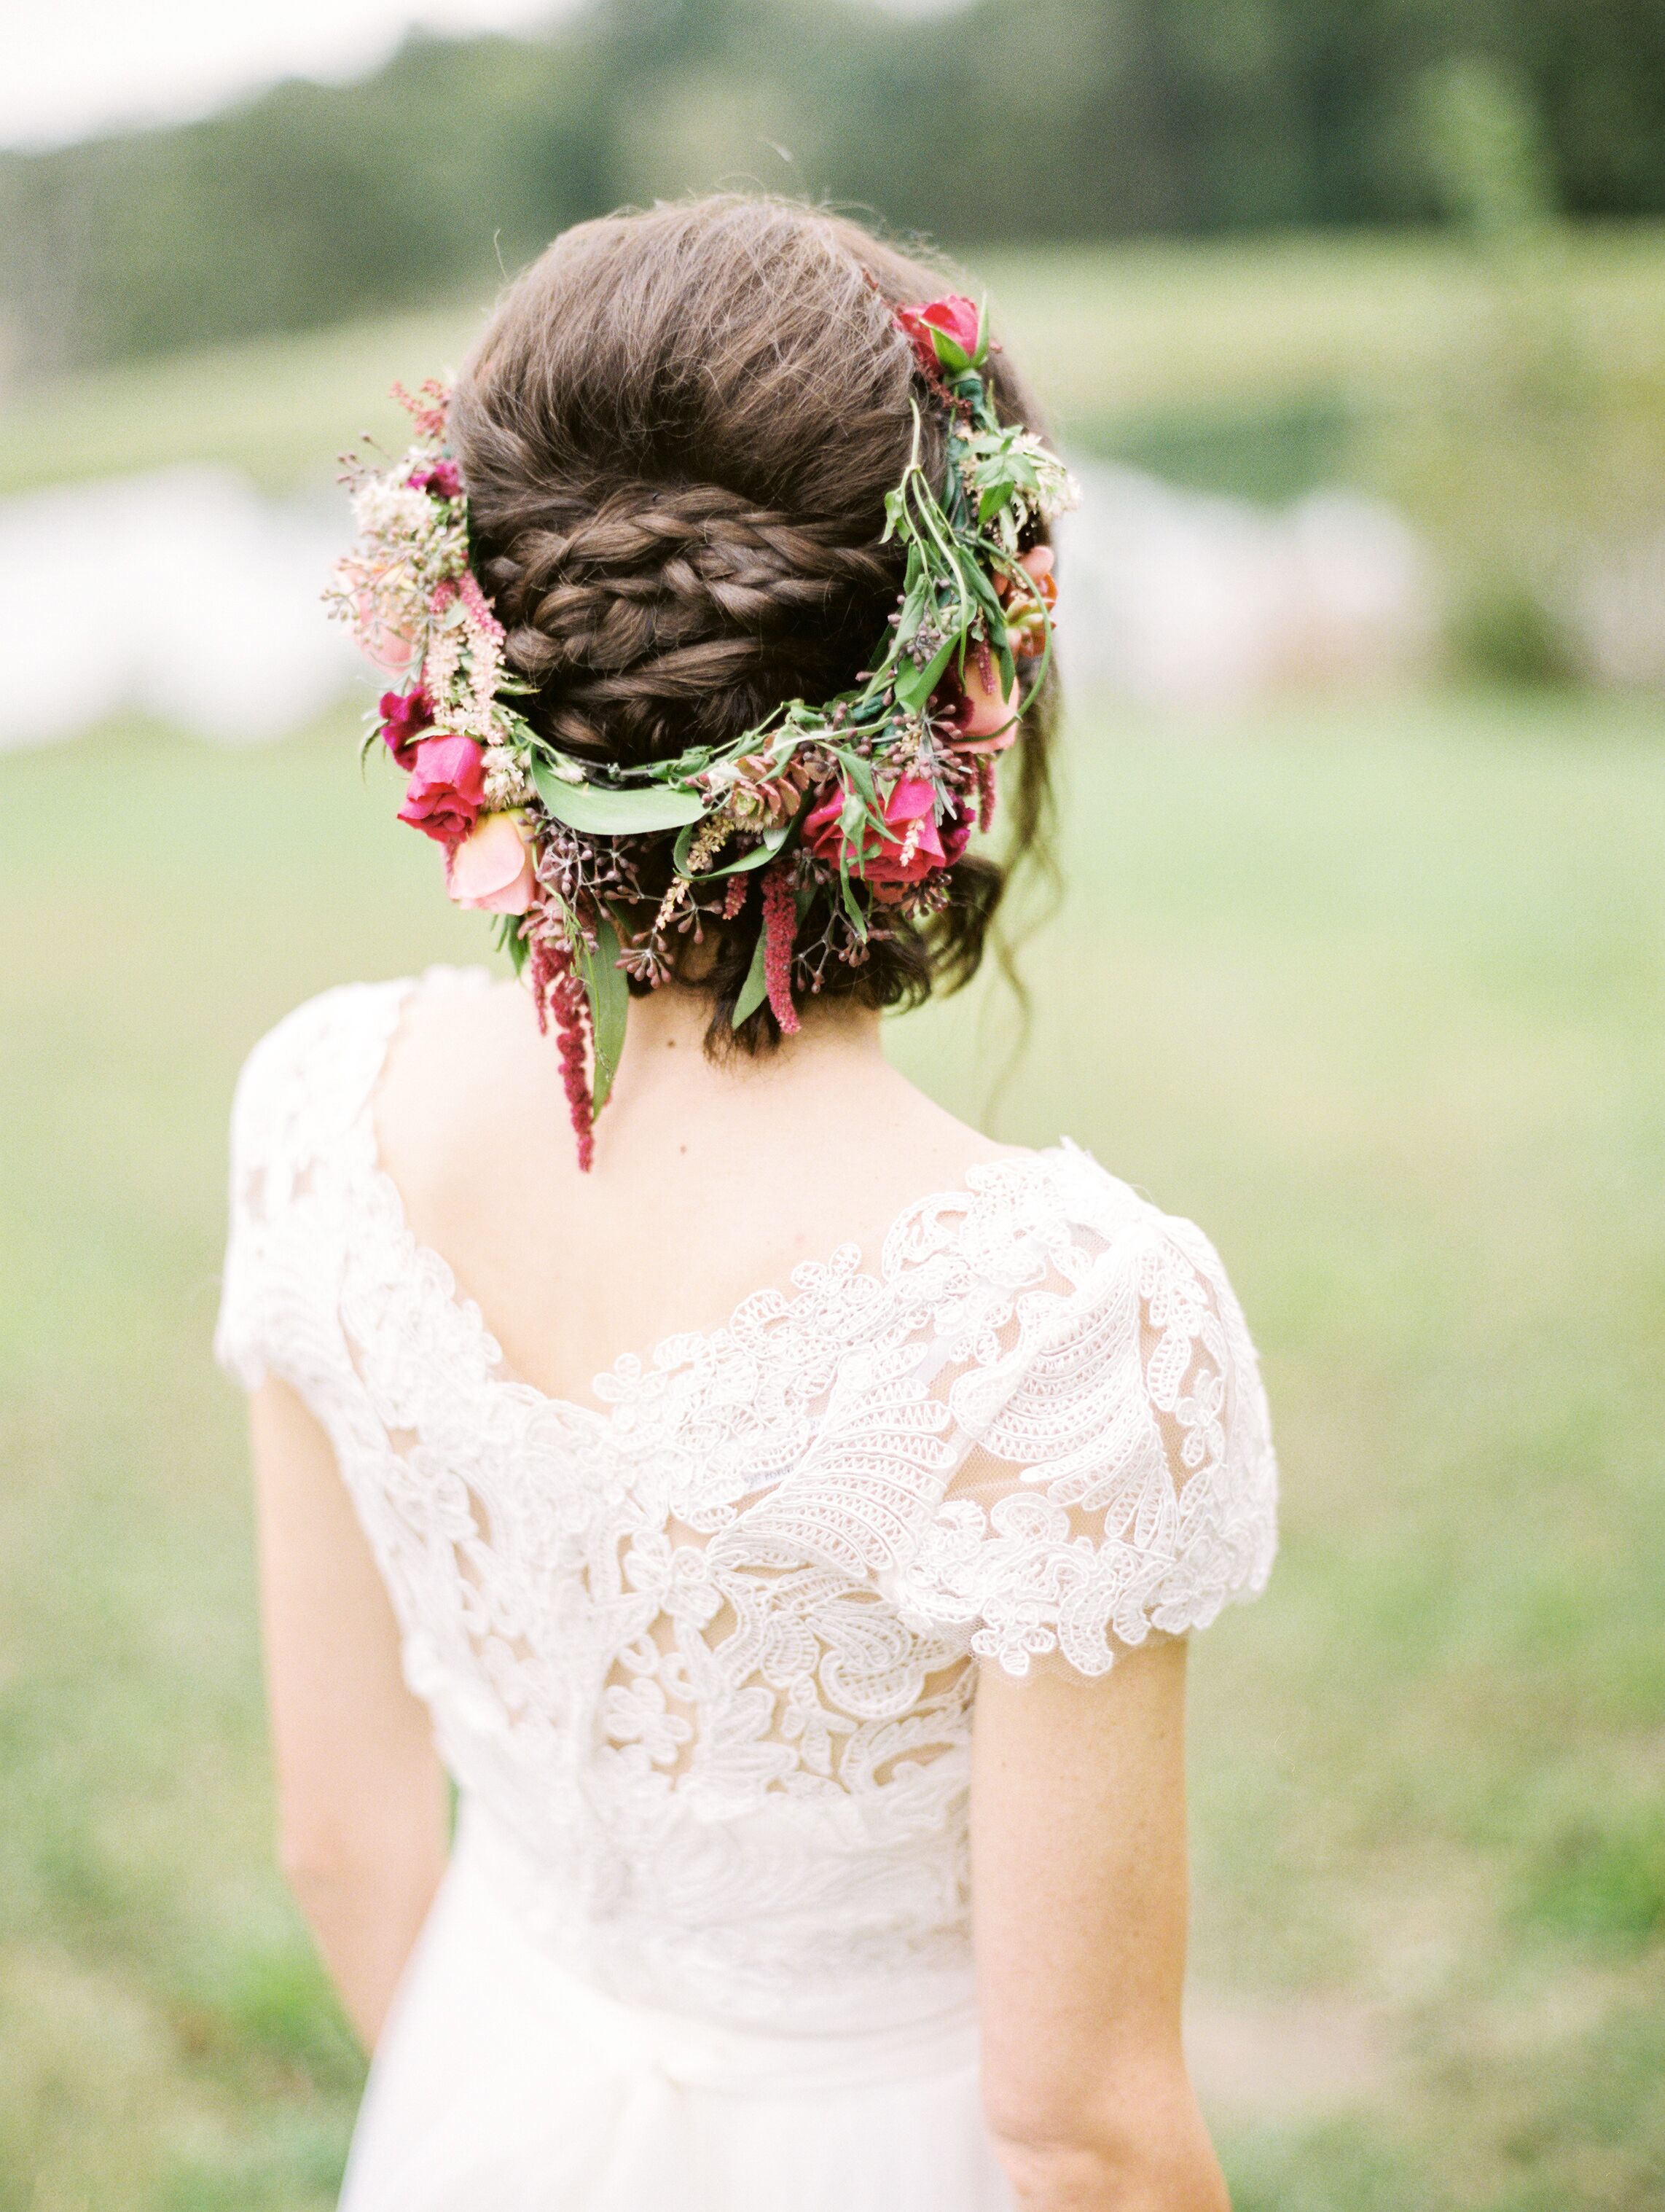 Braided Updo and Burgundy Flower Crown